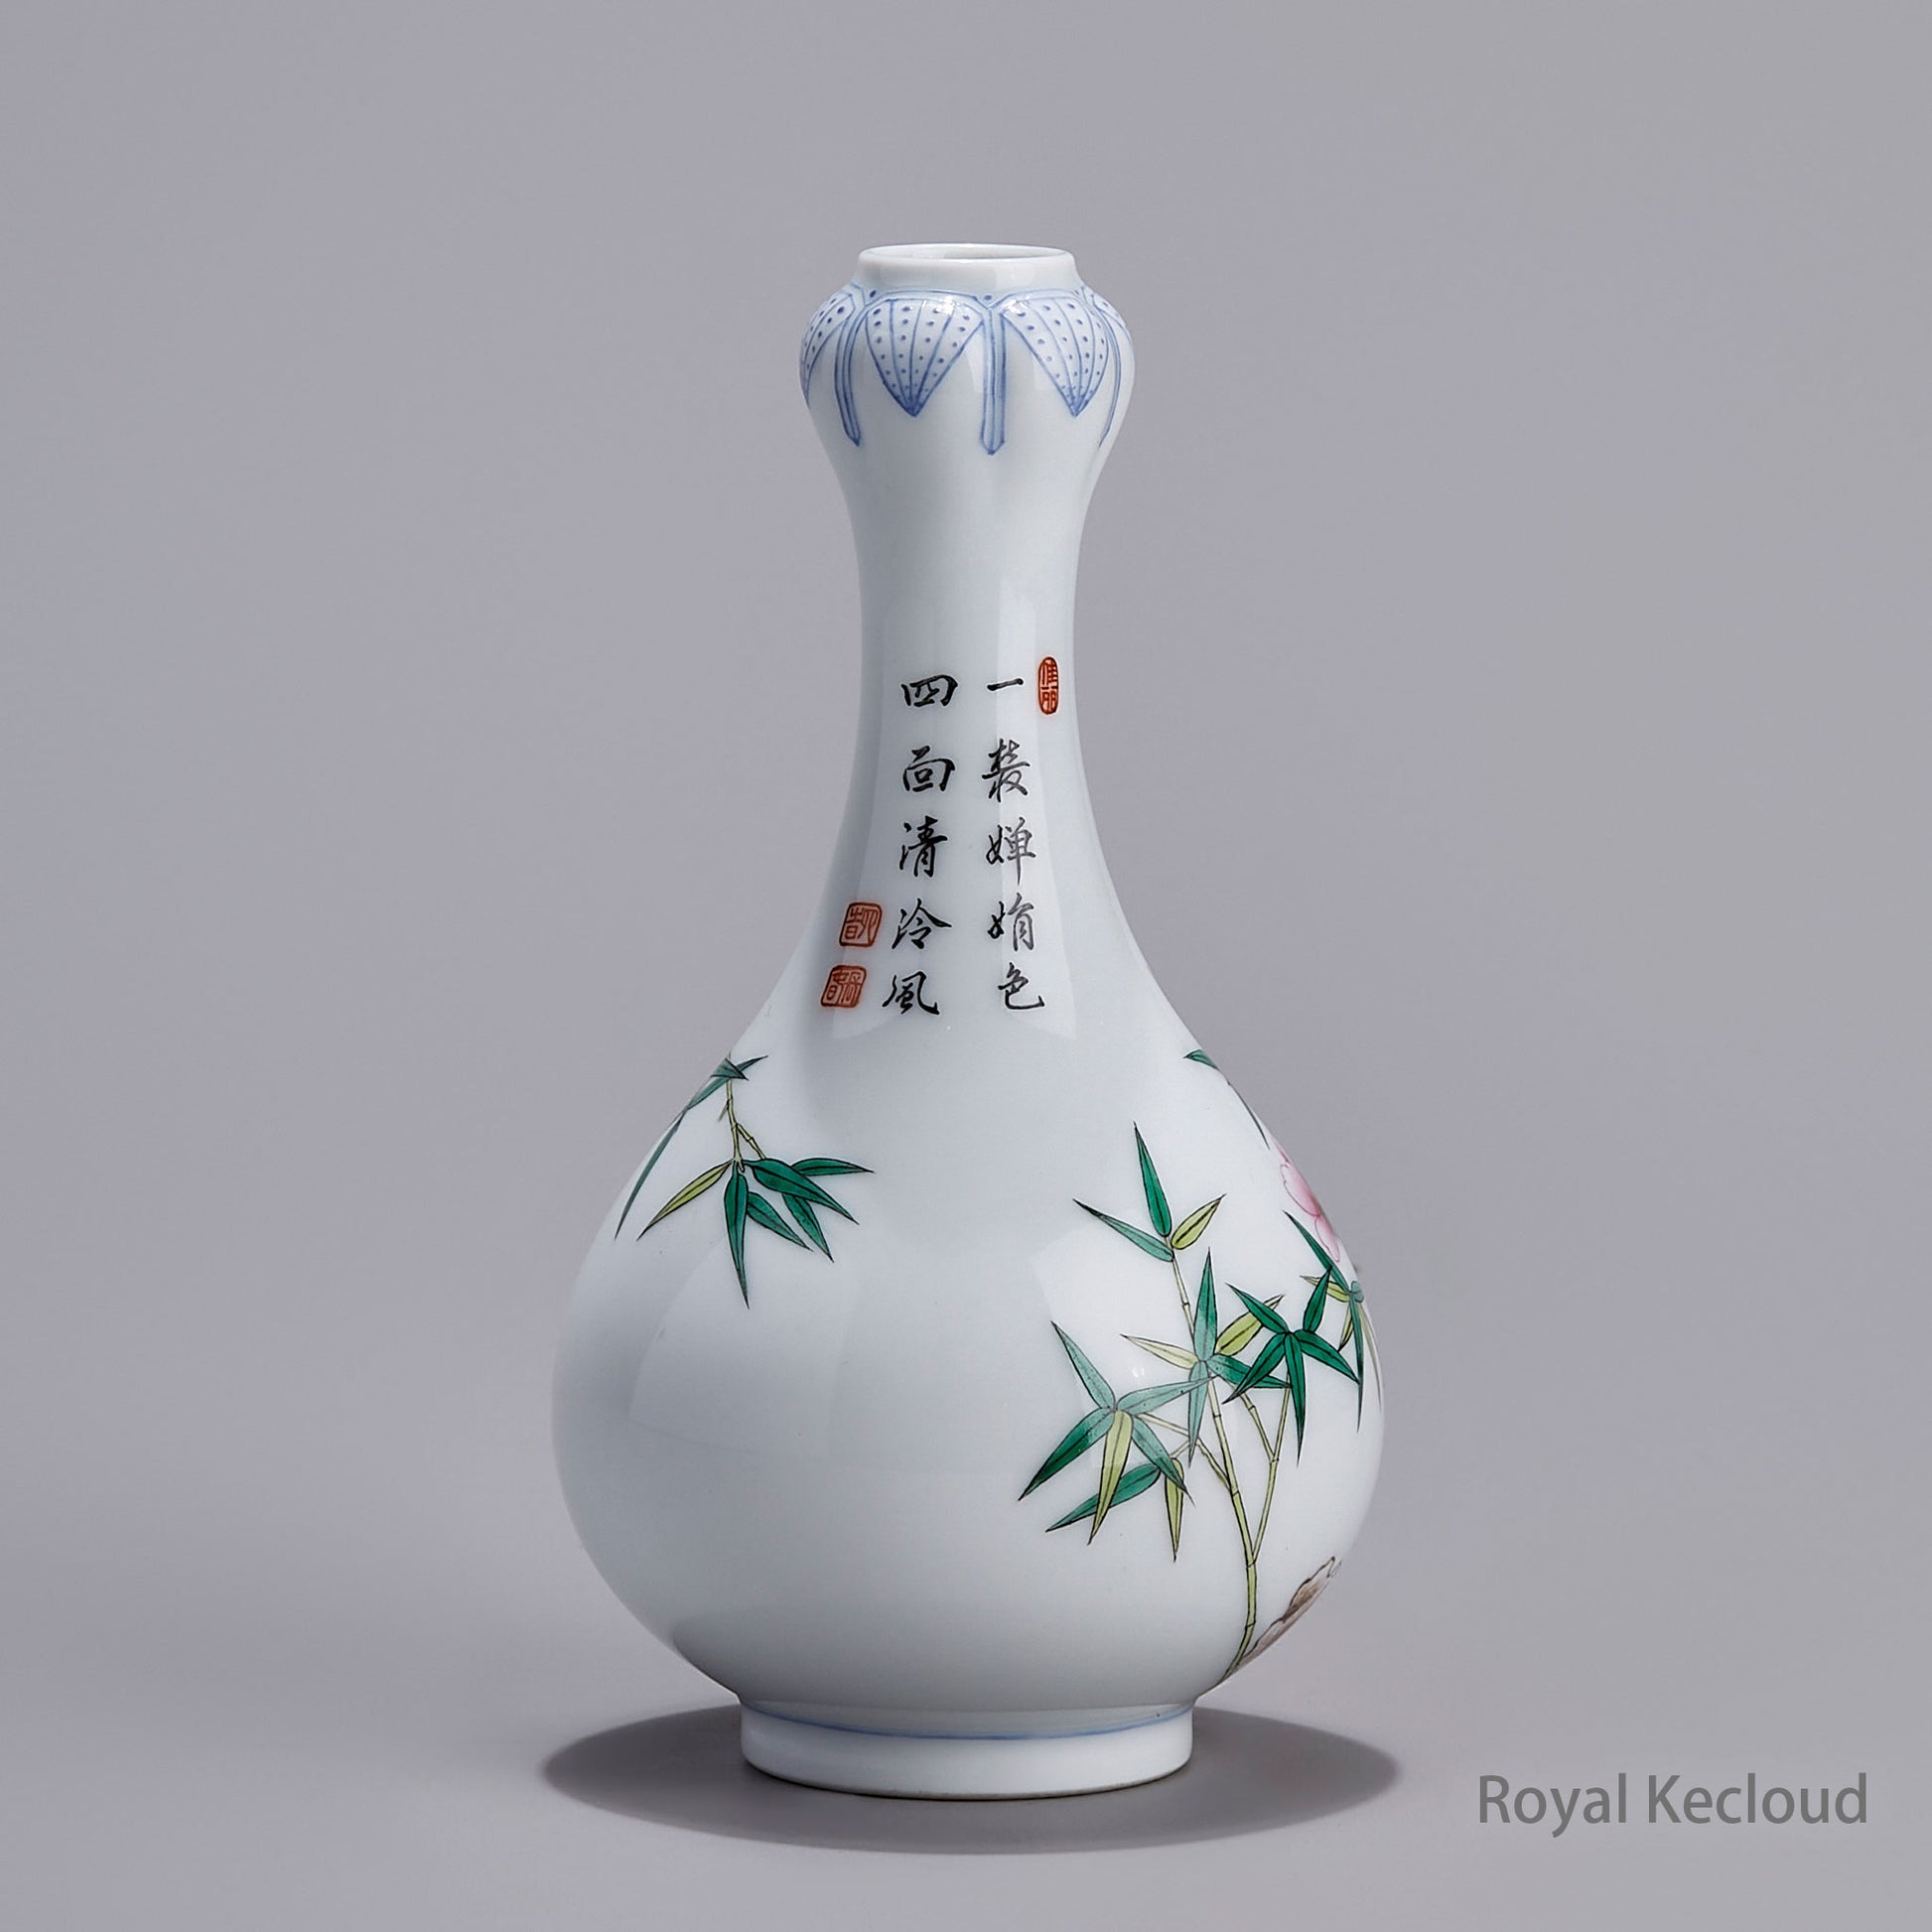 Jingdezhen Handmade Garlic-Mouth Porcelain Vase with Flower and Bamboo